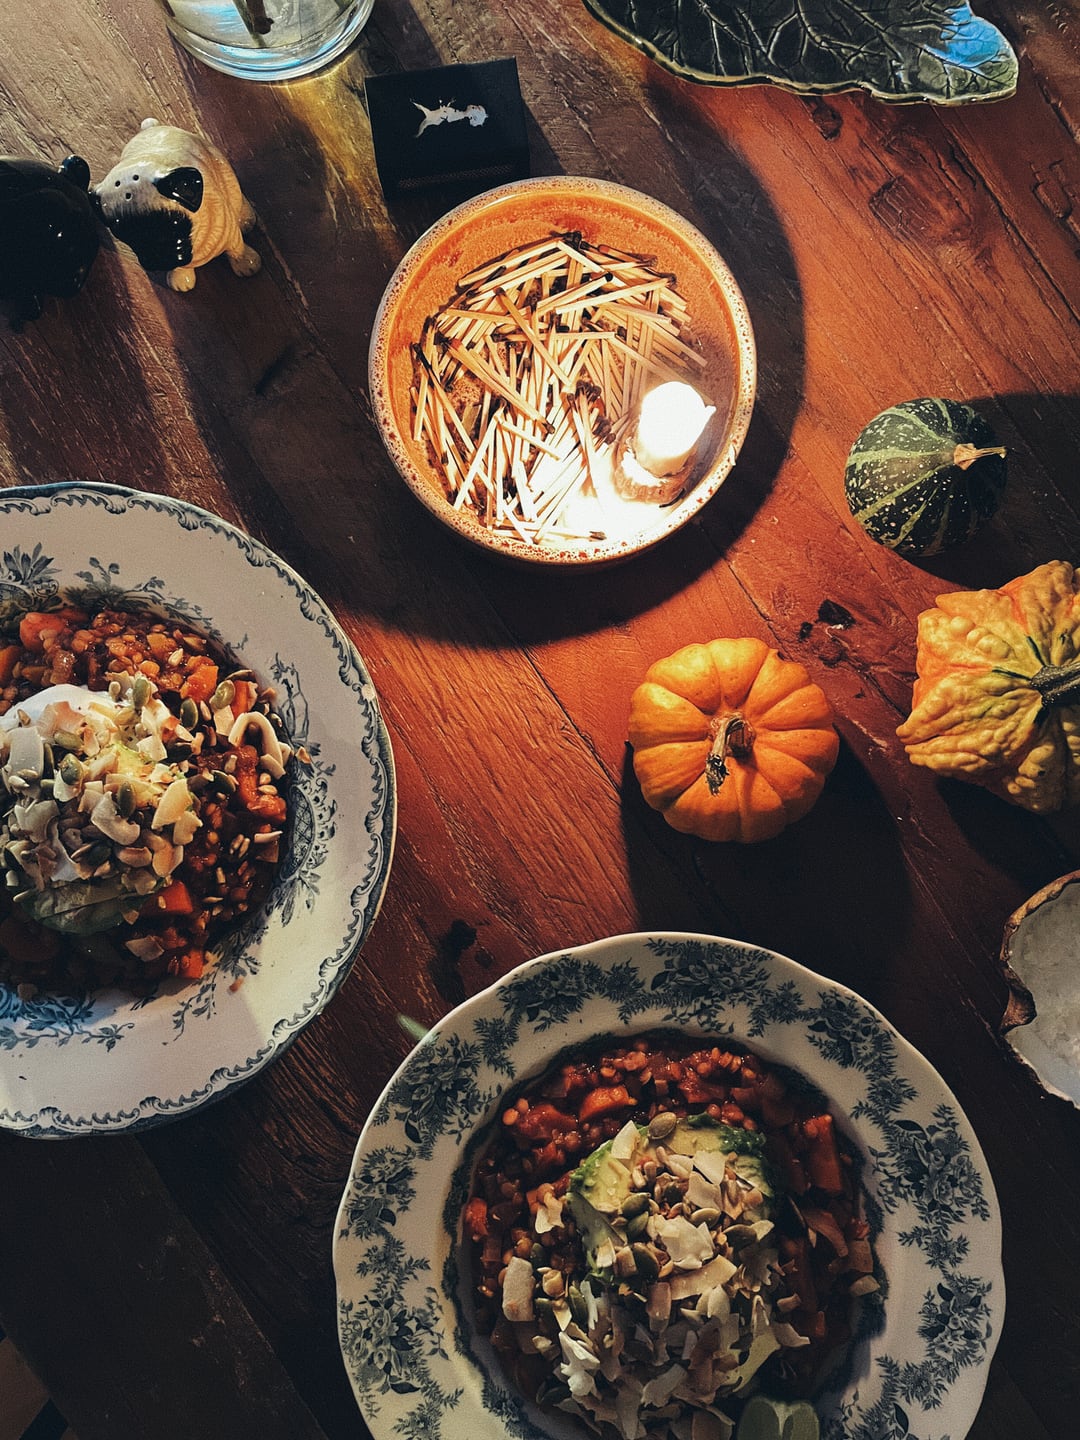 A table with two plates of dal, mini pumpkins, and a lit candle.